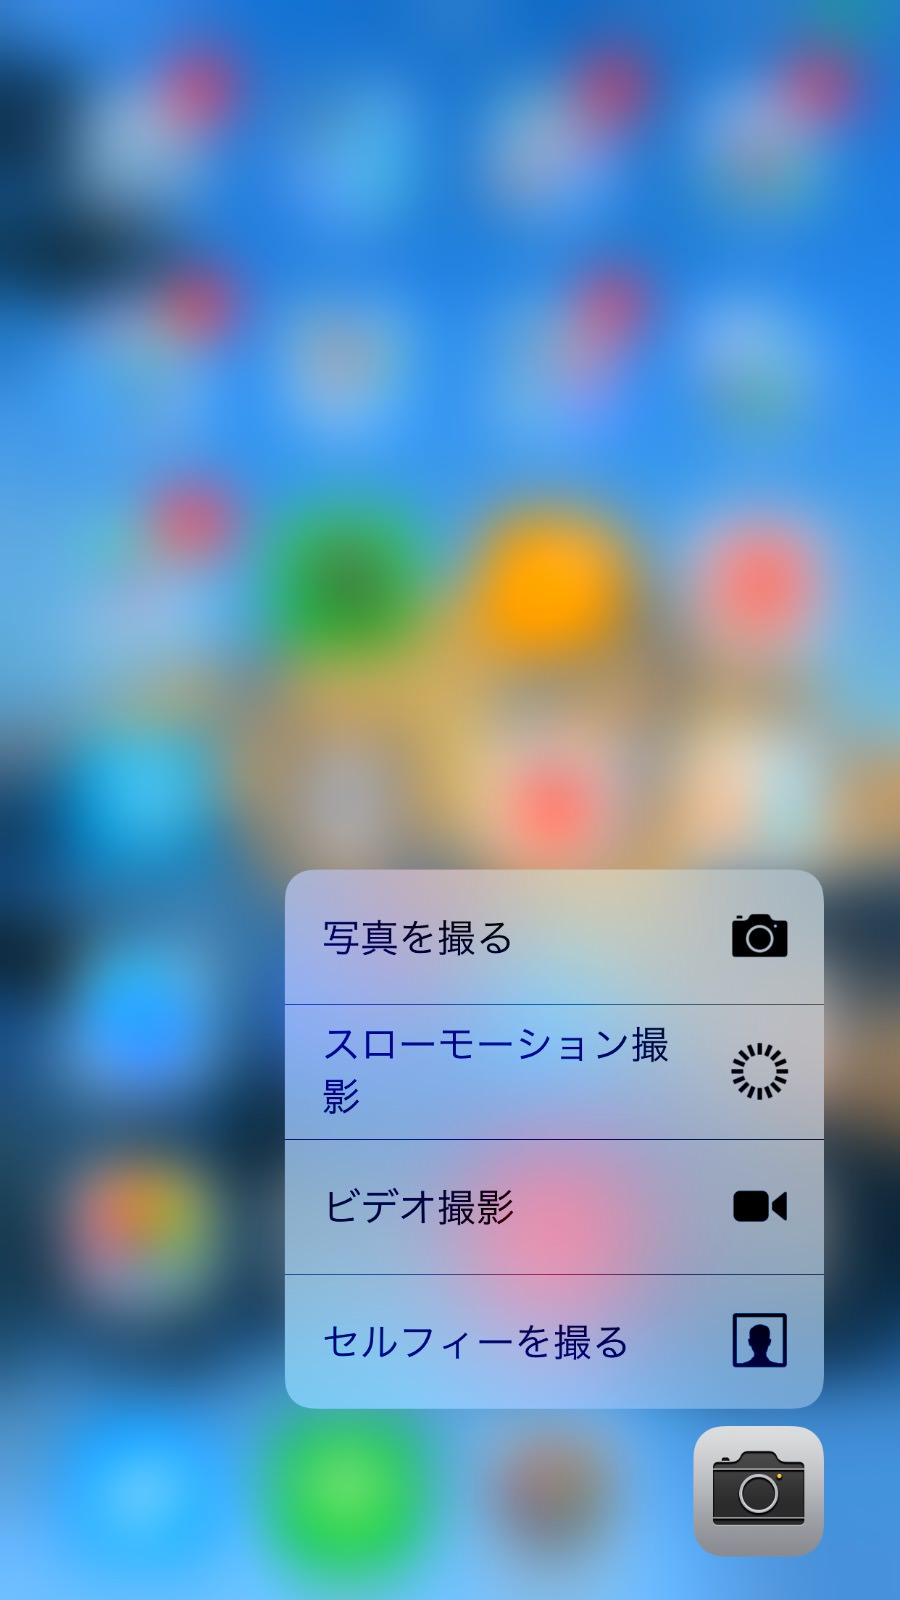 3dtouch control center 5317